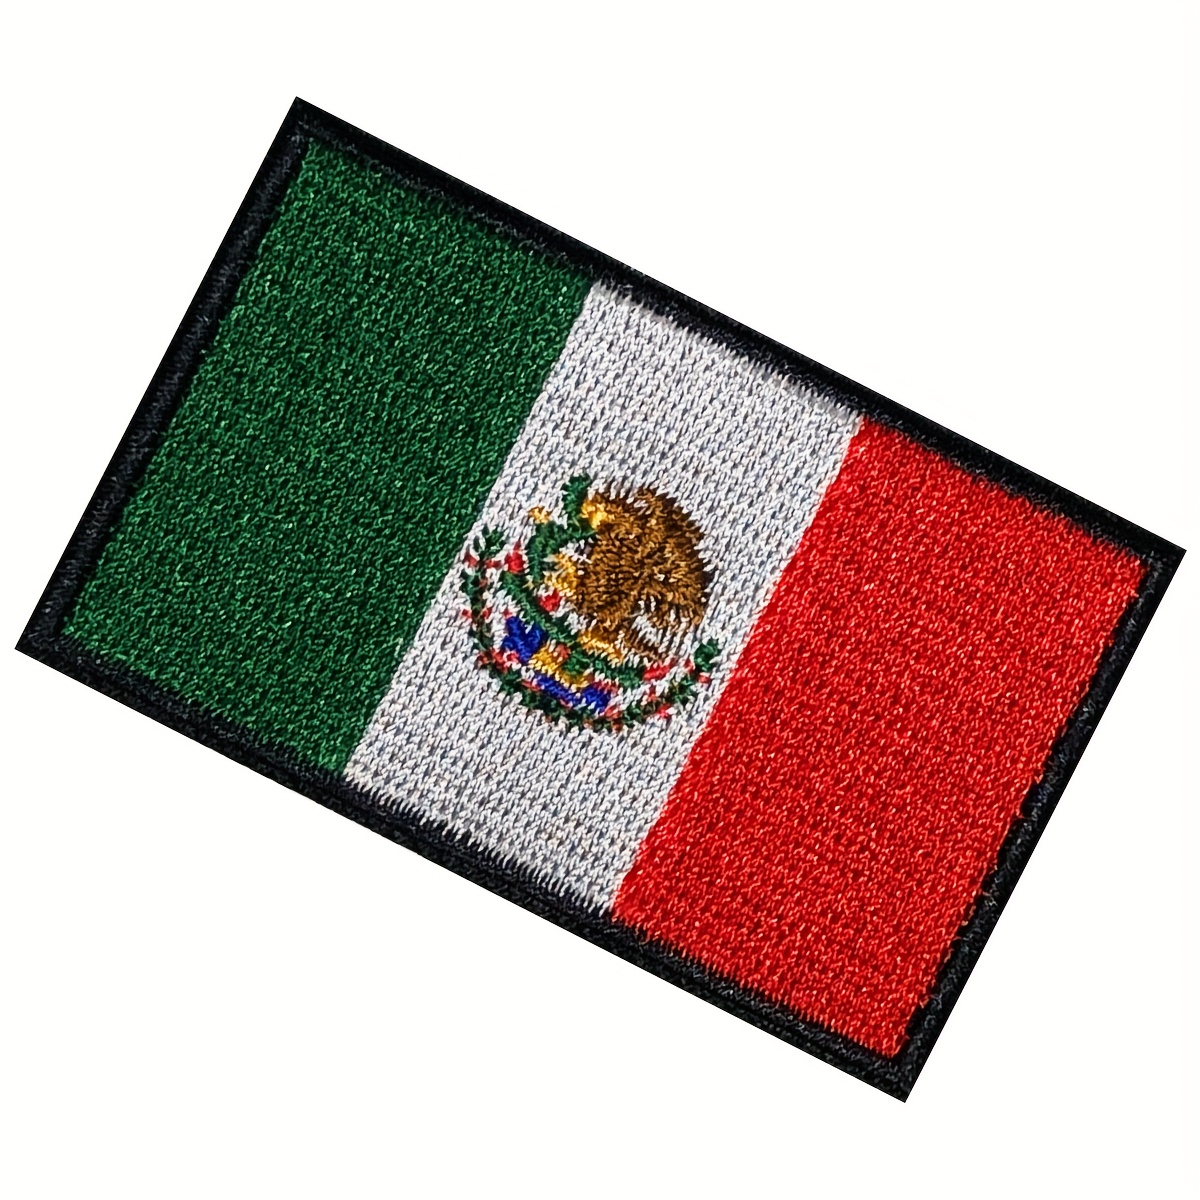 COHEALI 5pcs Embroidered Cloth Patch National Flag Applique Mexican Flag  Stickers for Clothing Fray Check for Fabric Iron on Patches Polyester  Thread